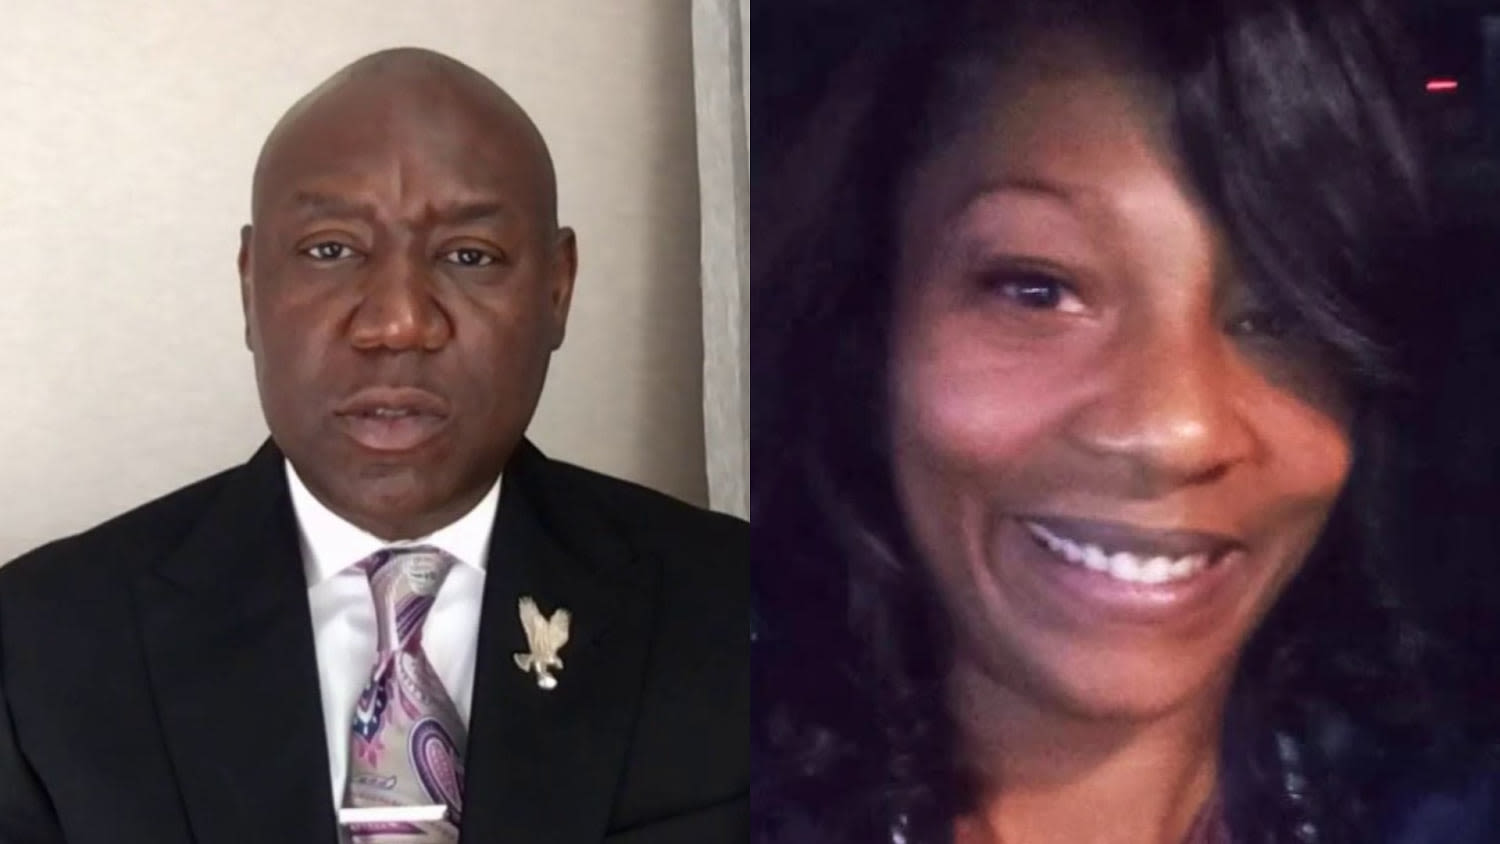 'The worst police shooting video ever:' Civil rights attorney on Sonya Massey tragedy